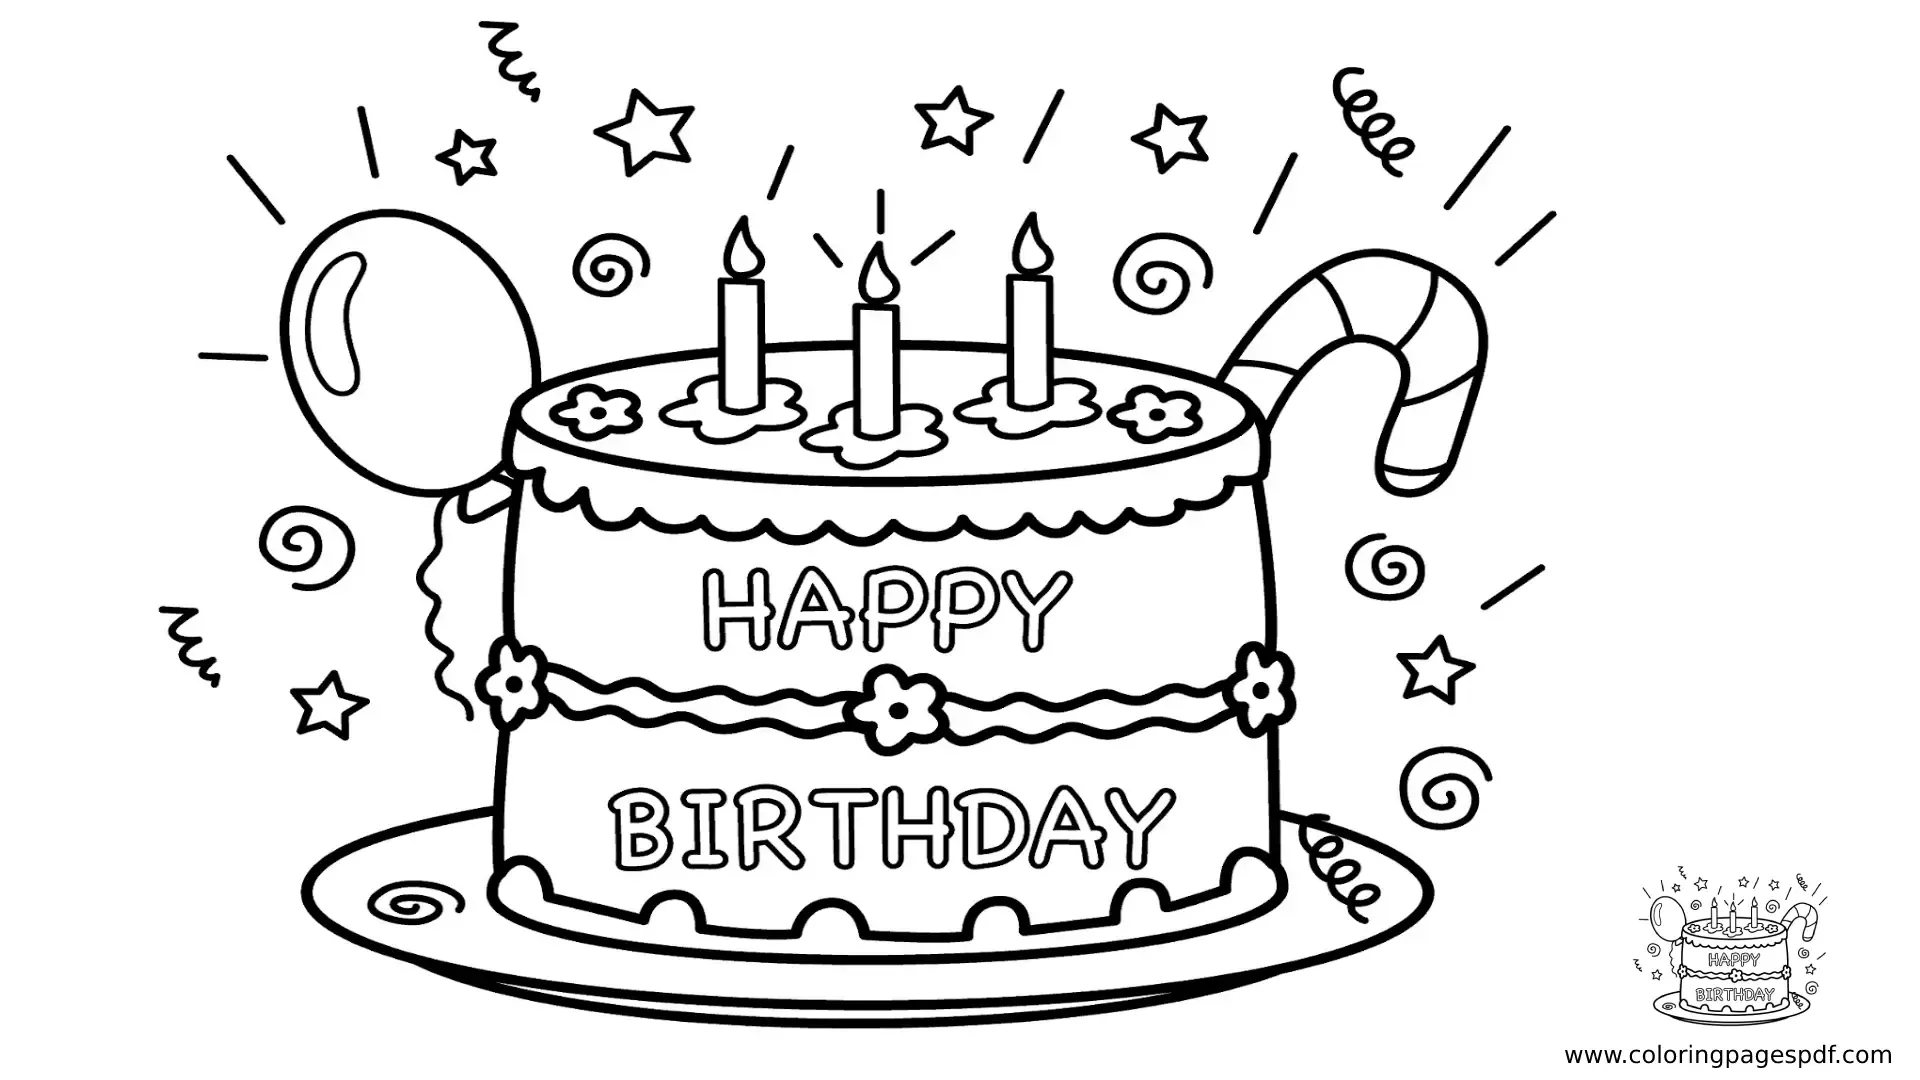 Coloring Pages Of Happy Birthday Cake